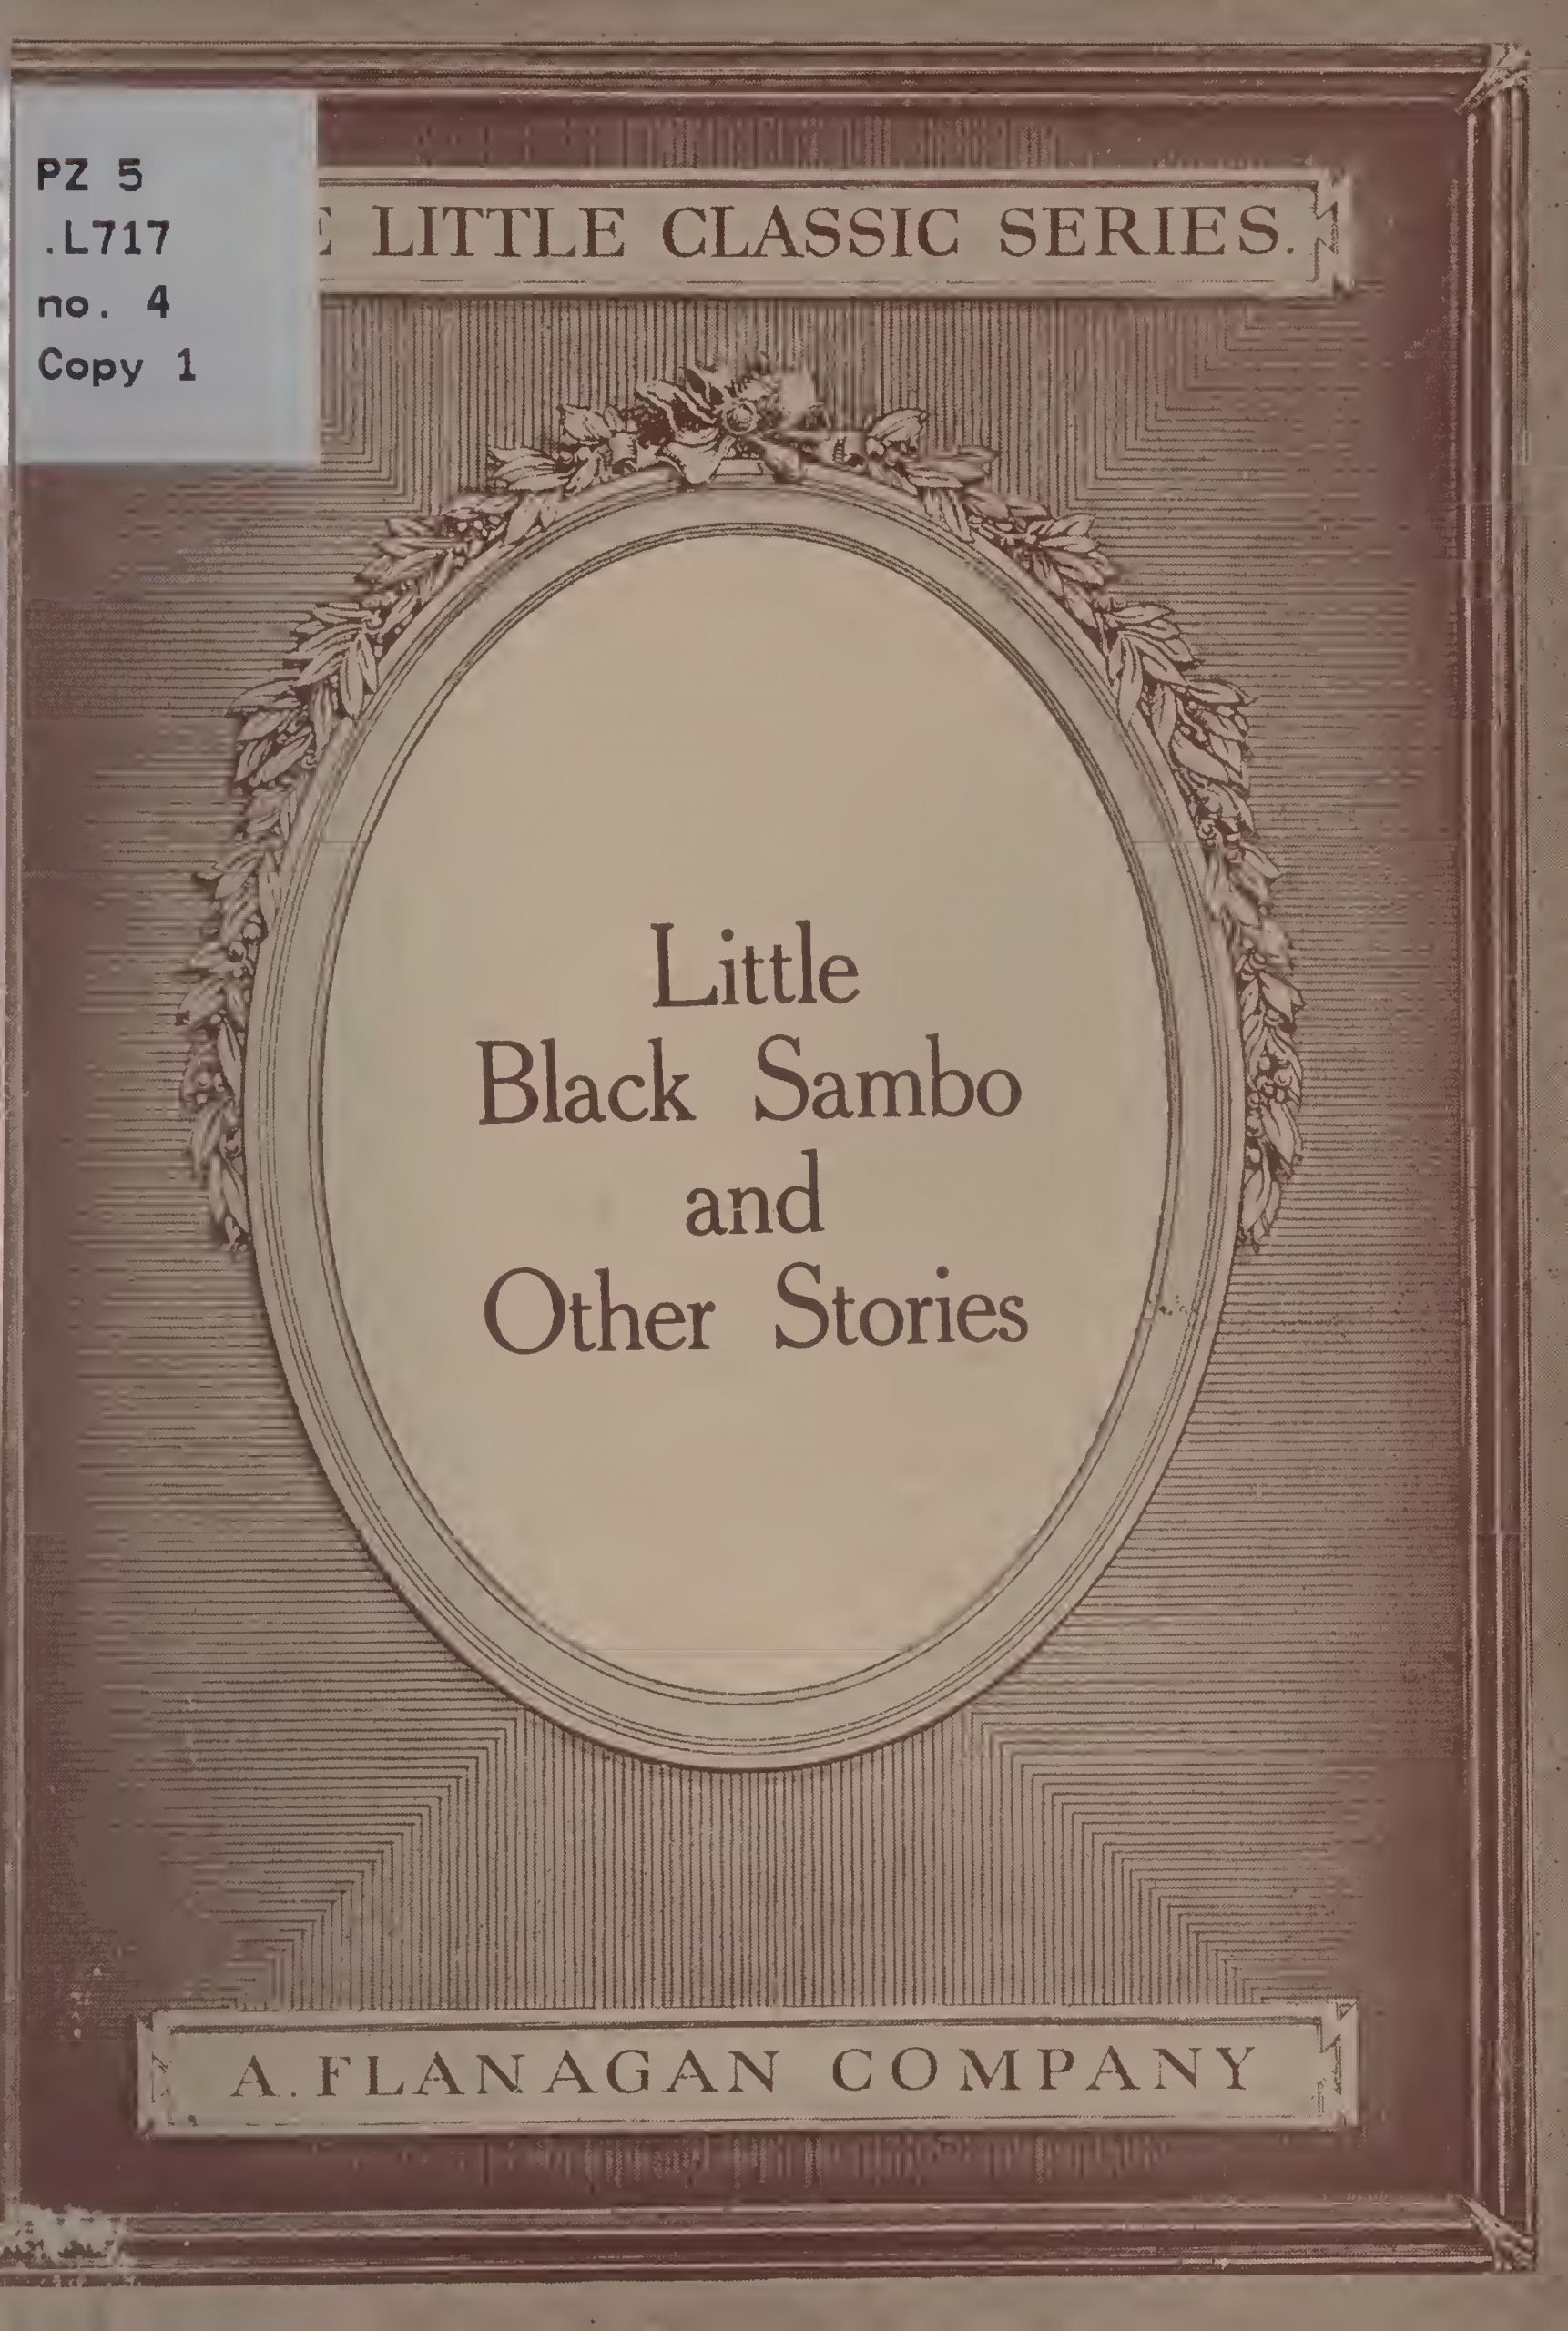 Cover of "Little Black Sambo and Other Stories"